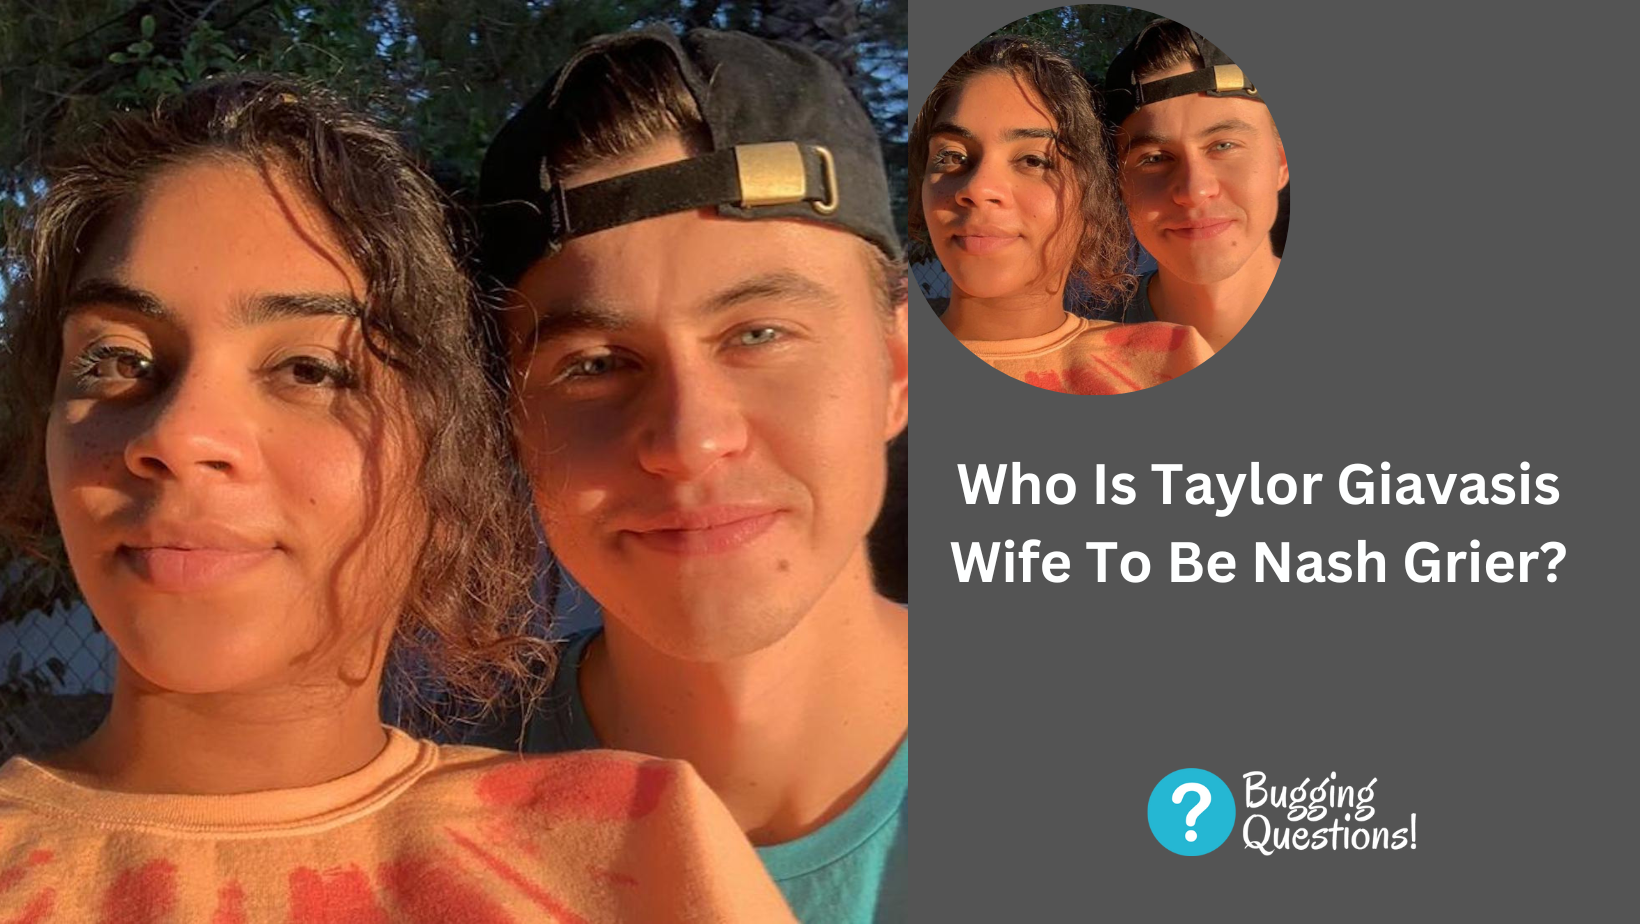 Who Is Taylor Giavasis Wife To Be Nash Grier?